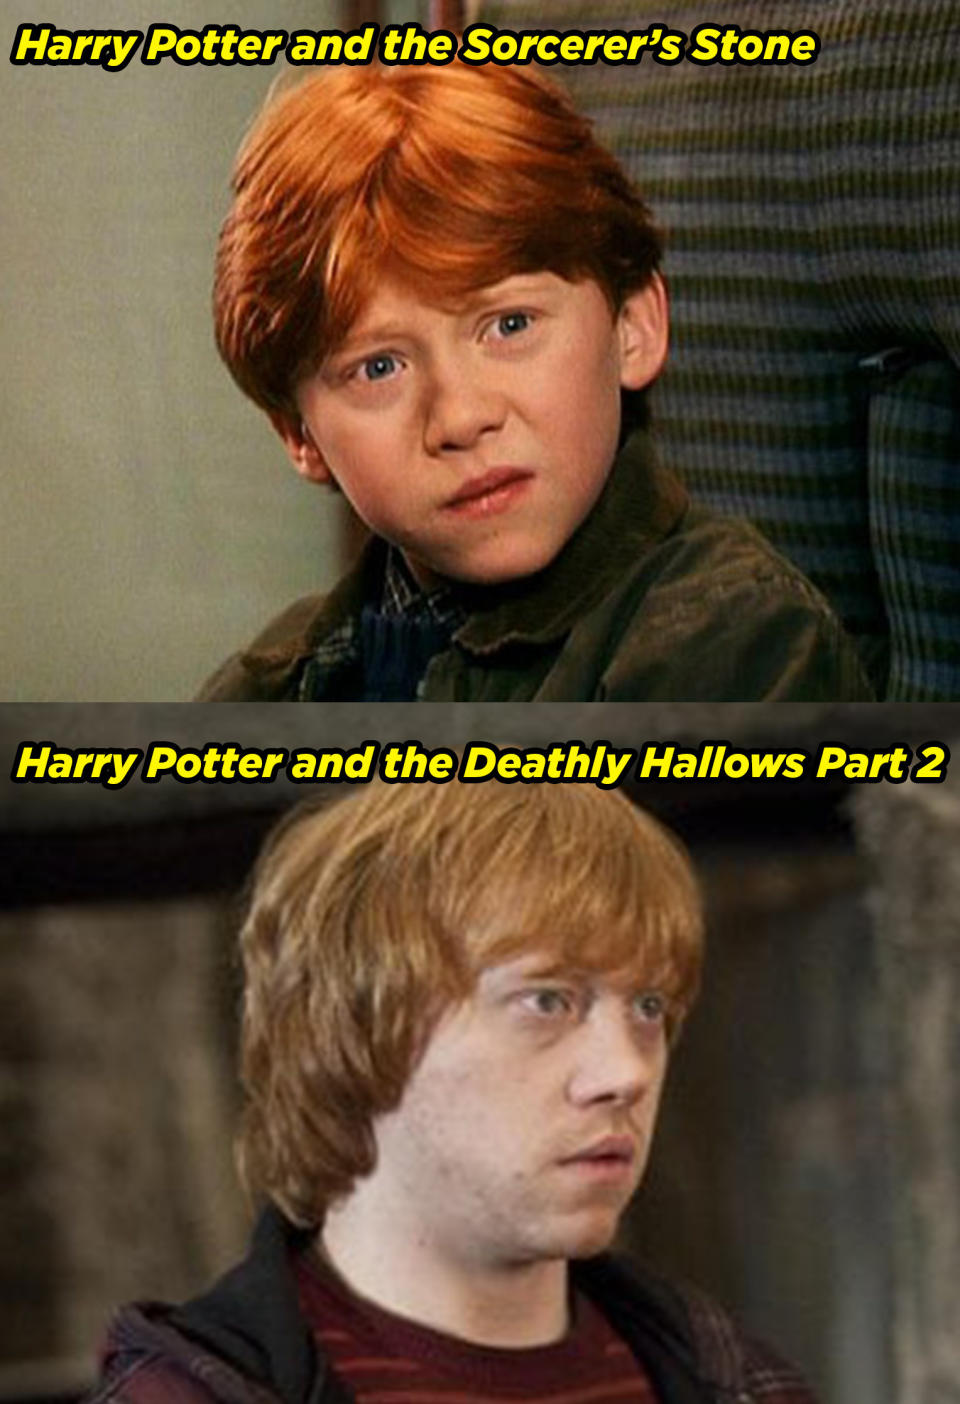 Rupert Grint as a child in the Sorcerer's Stone and teenager in Deathly Hallows Part 2